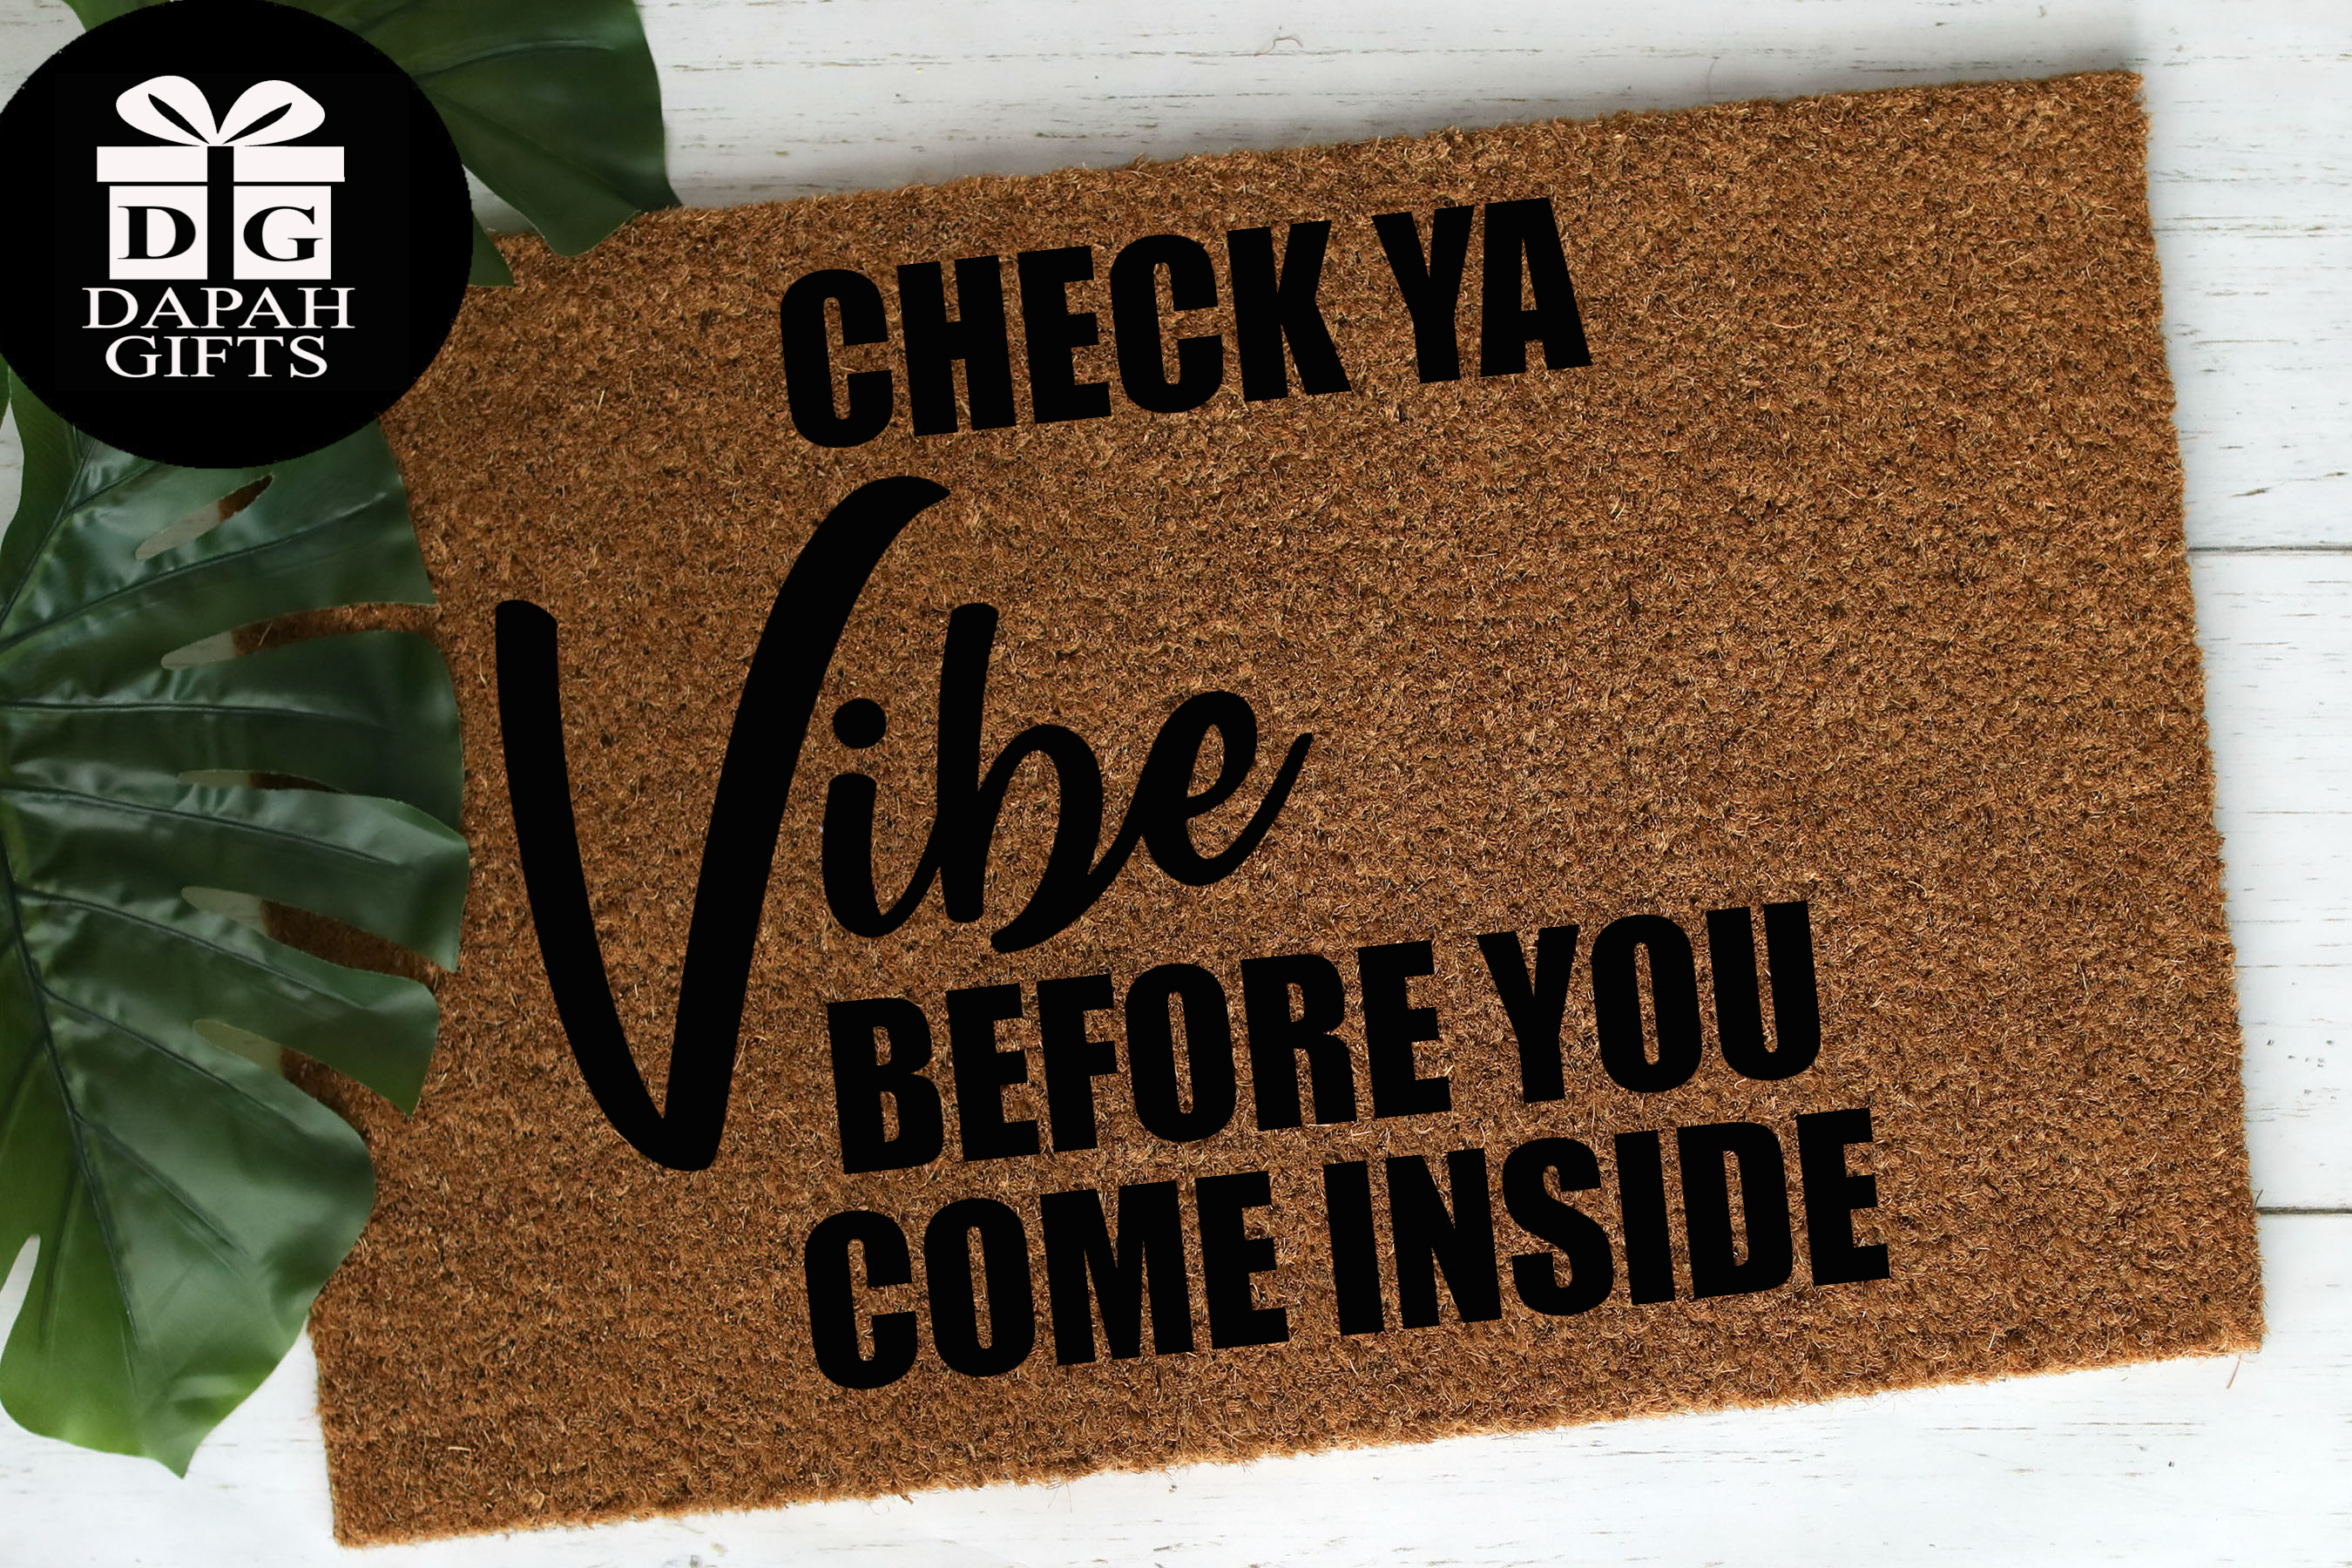 Check ya Vibe before you come Inside - Doormat